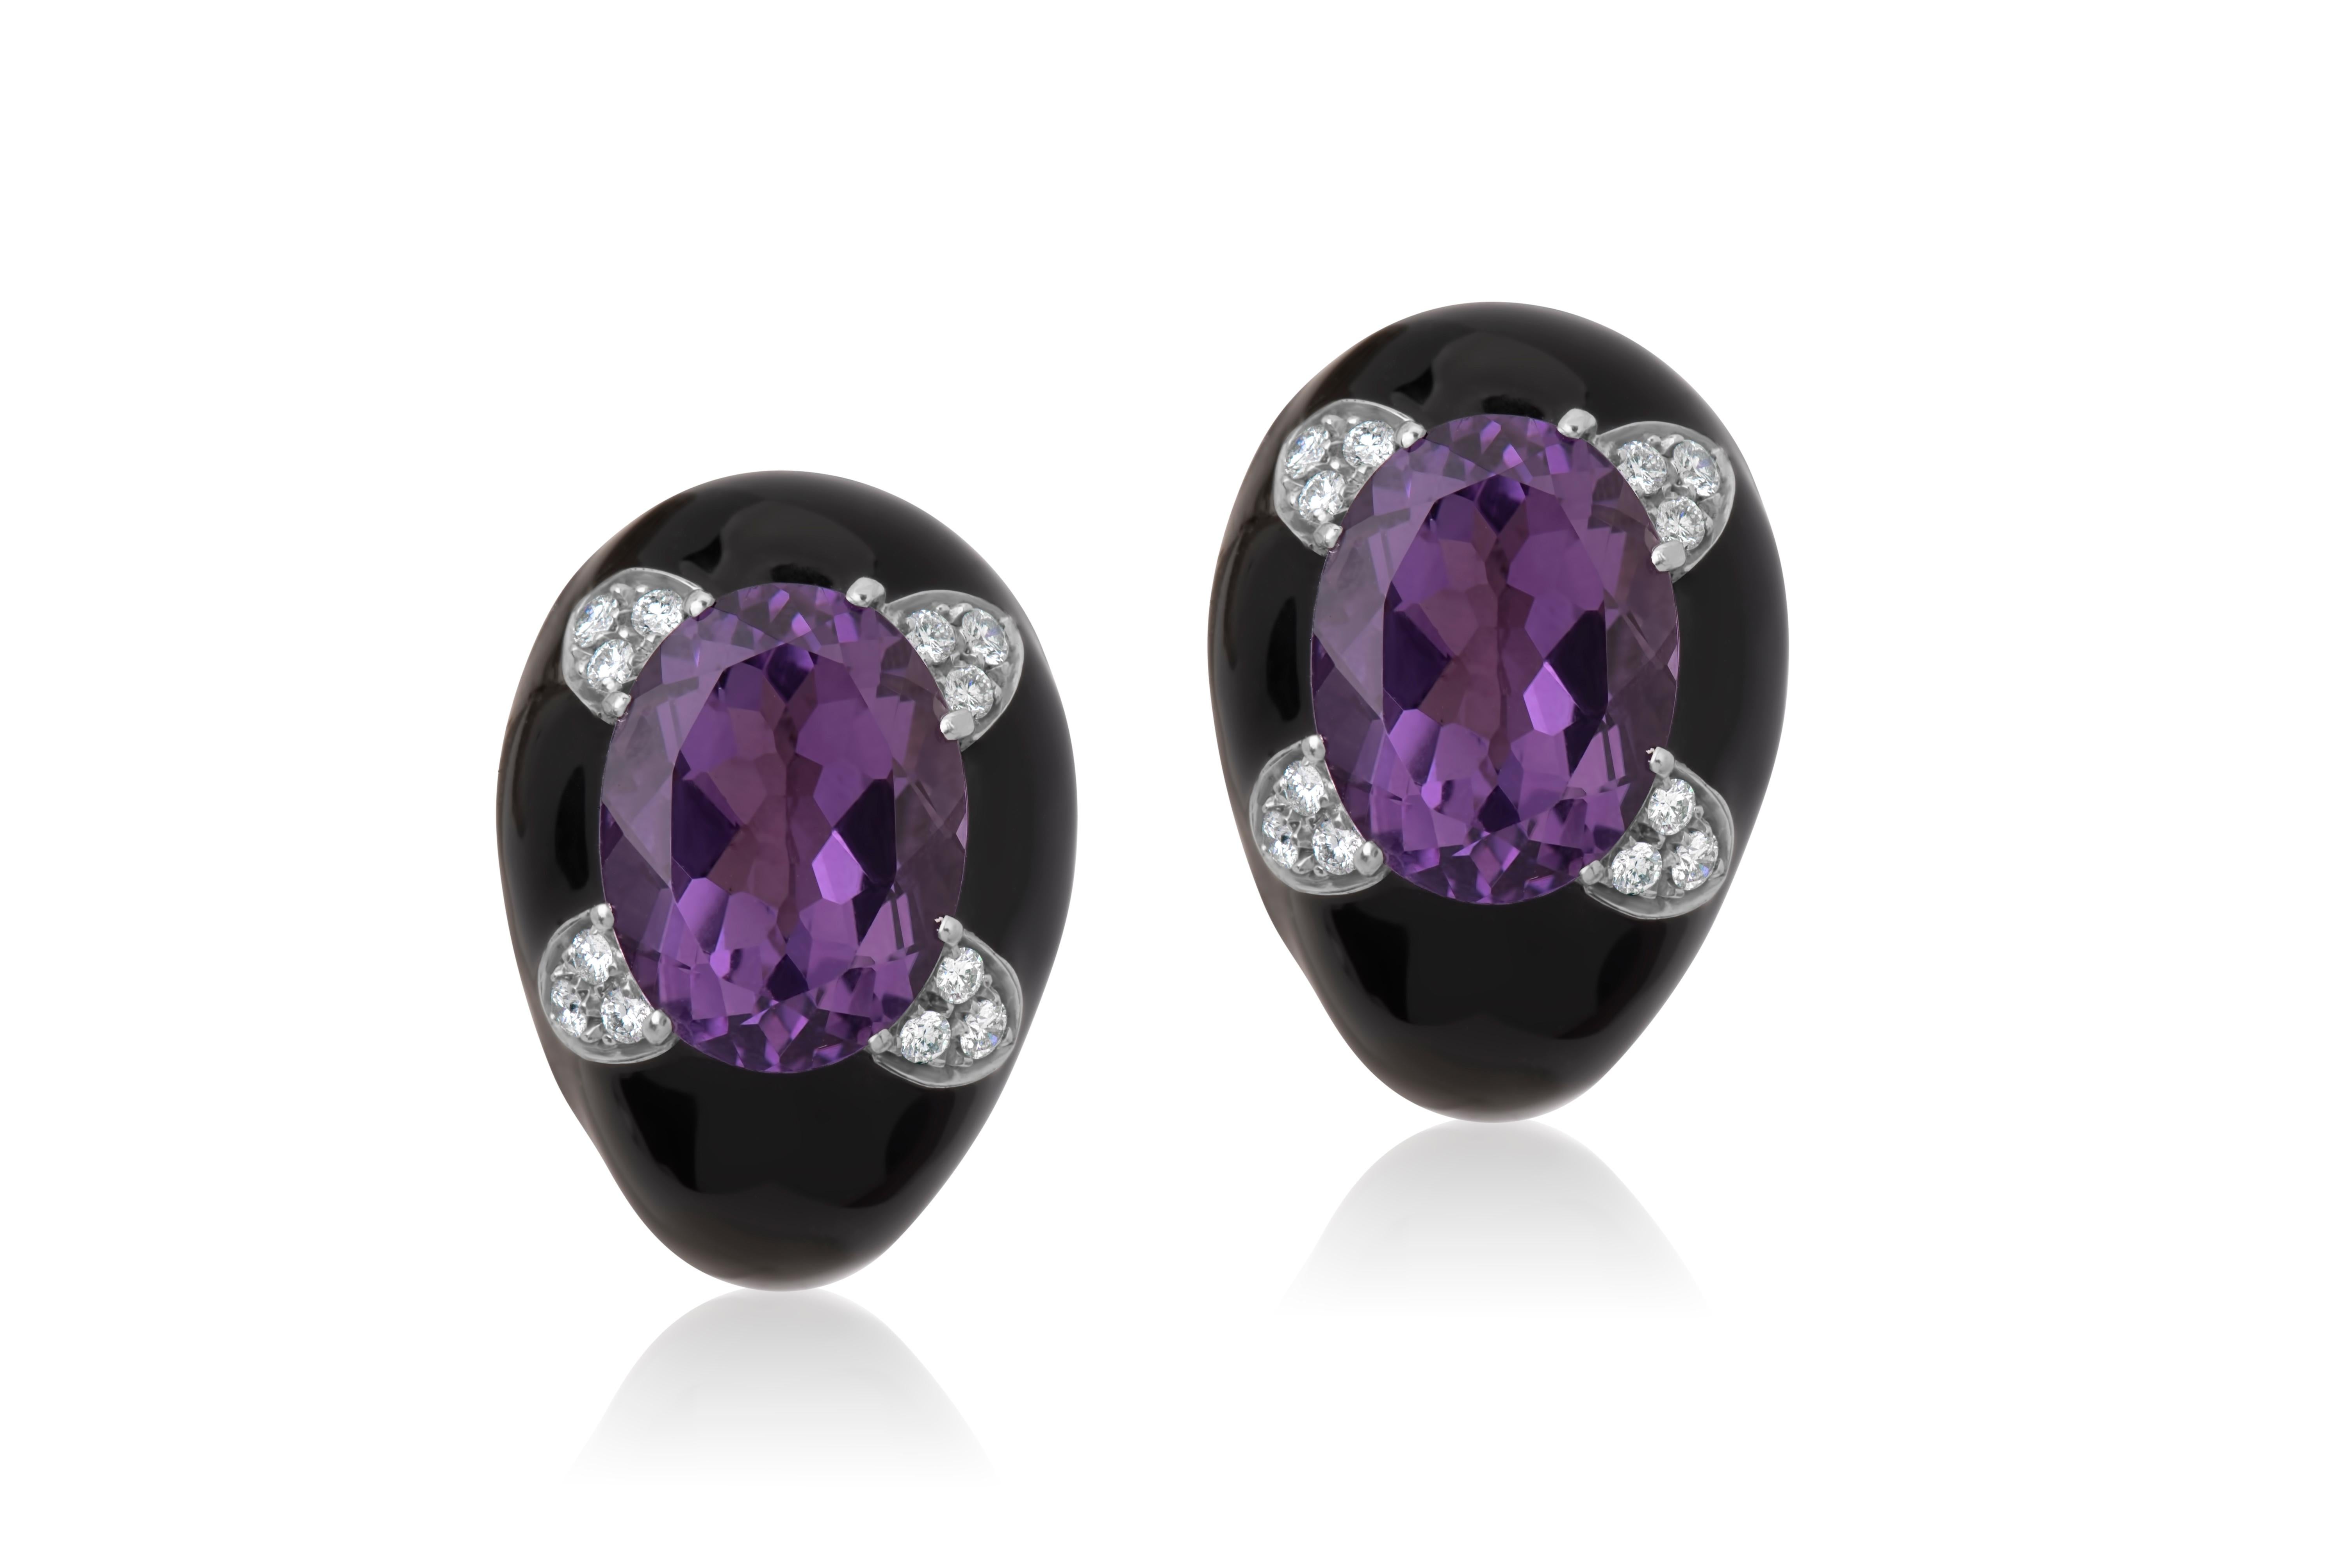 Andreoli Black Enamel Amethyst Diamond Clip on Earrings 18kt Silver

These Andreoli earrings feature:

- 0.67 carat Diamond (F-G-H Color, VS-SI Clarity)
- 17.57 carat Amethyst
- Silver
- 18kt Gold
- Black Enamel
- Made in Italy